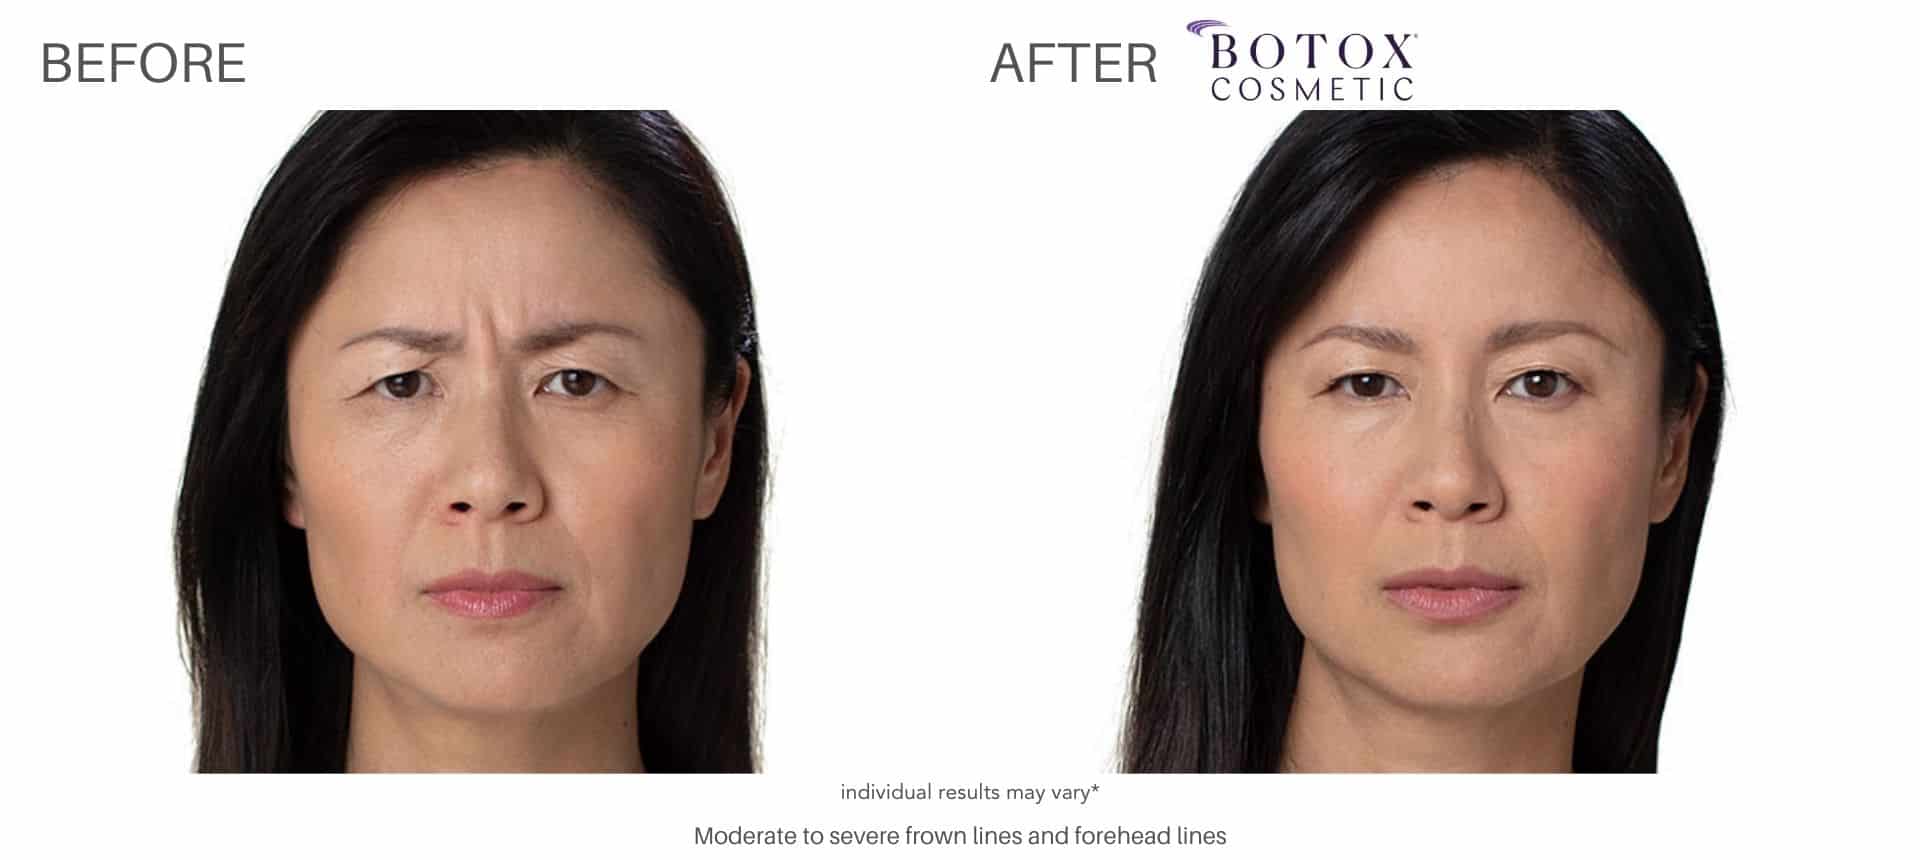 Woman's before and after pictures from botox